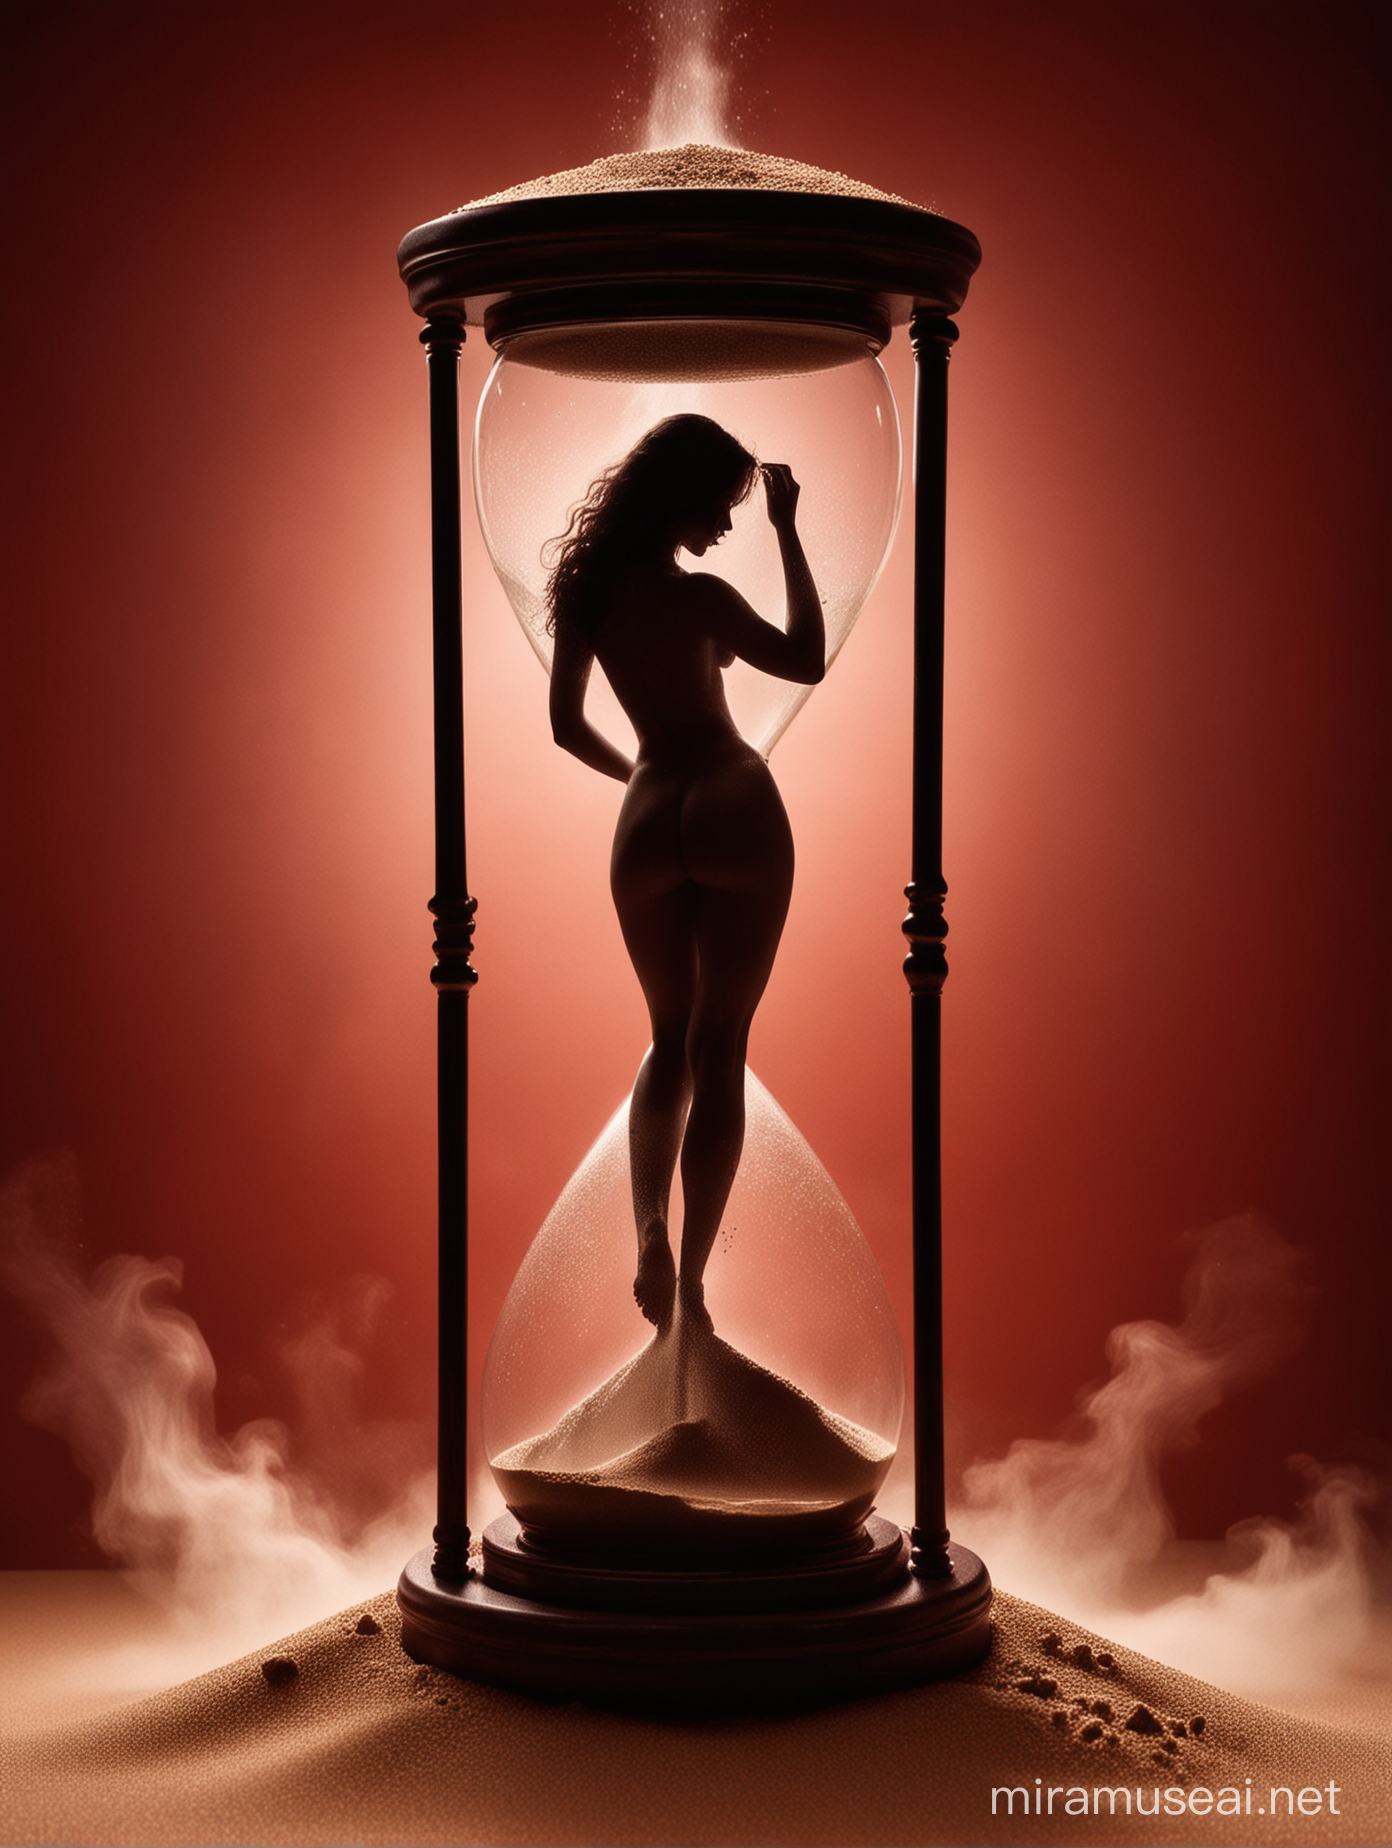 Sculpted Nude Woman in Hourglass Capturing Time in a Sensual Scene